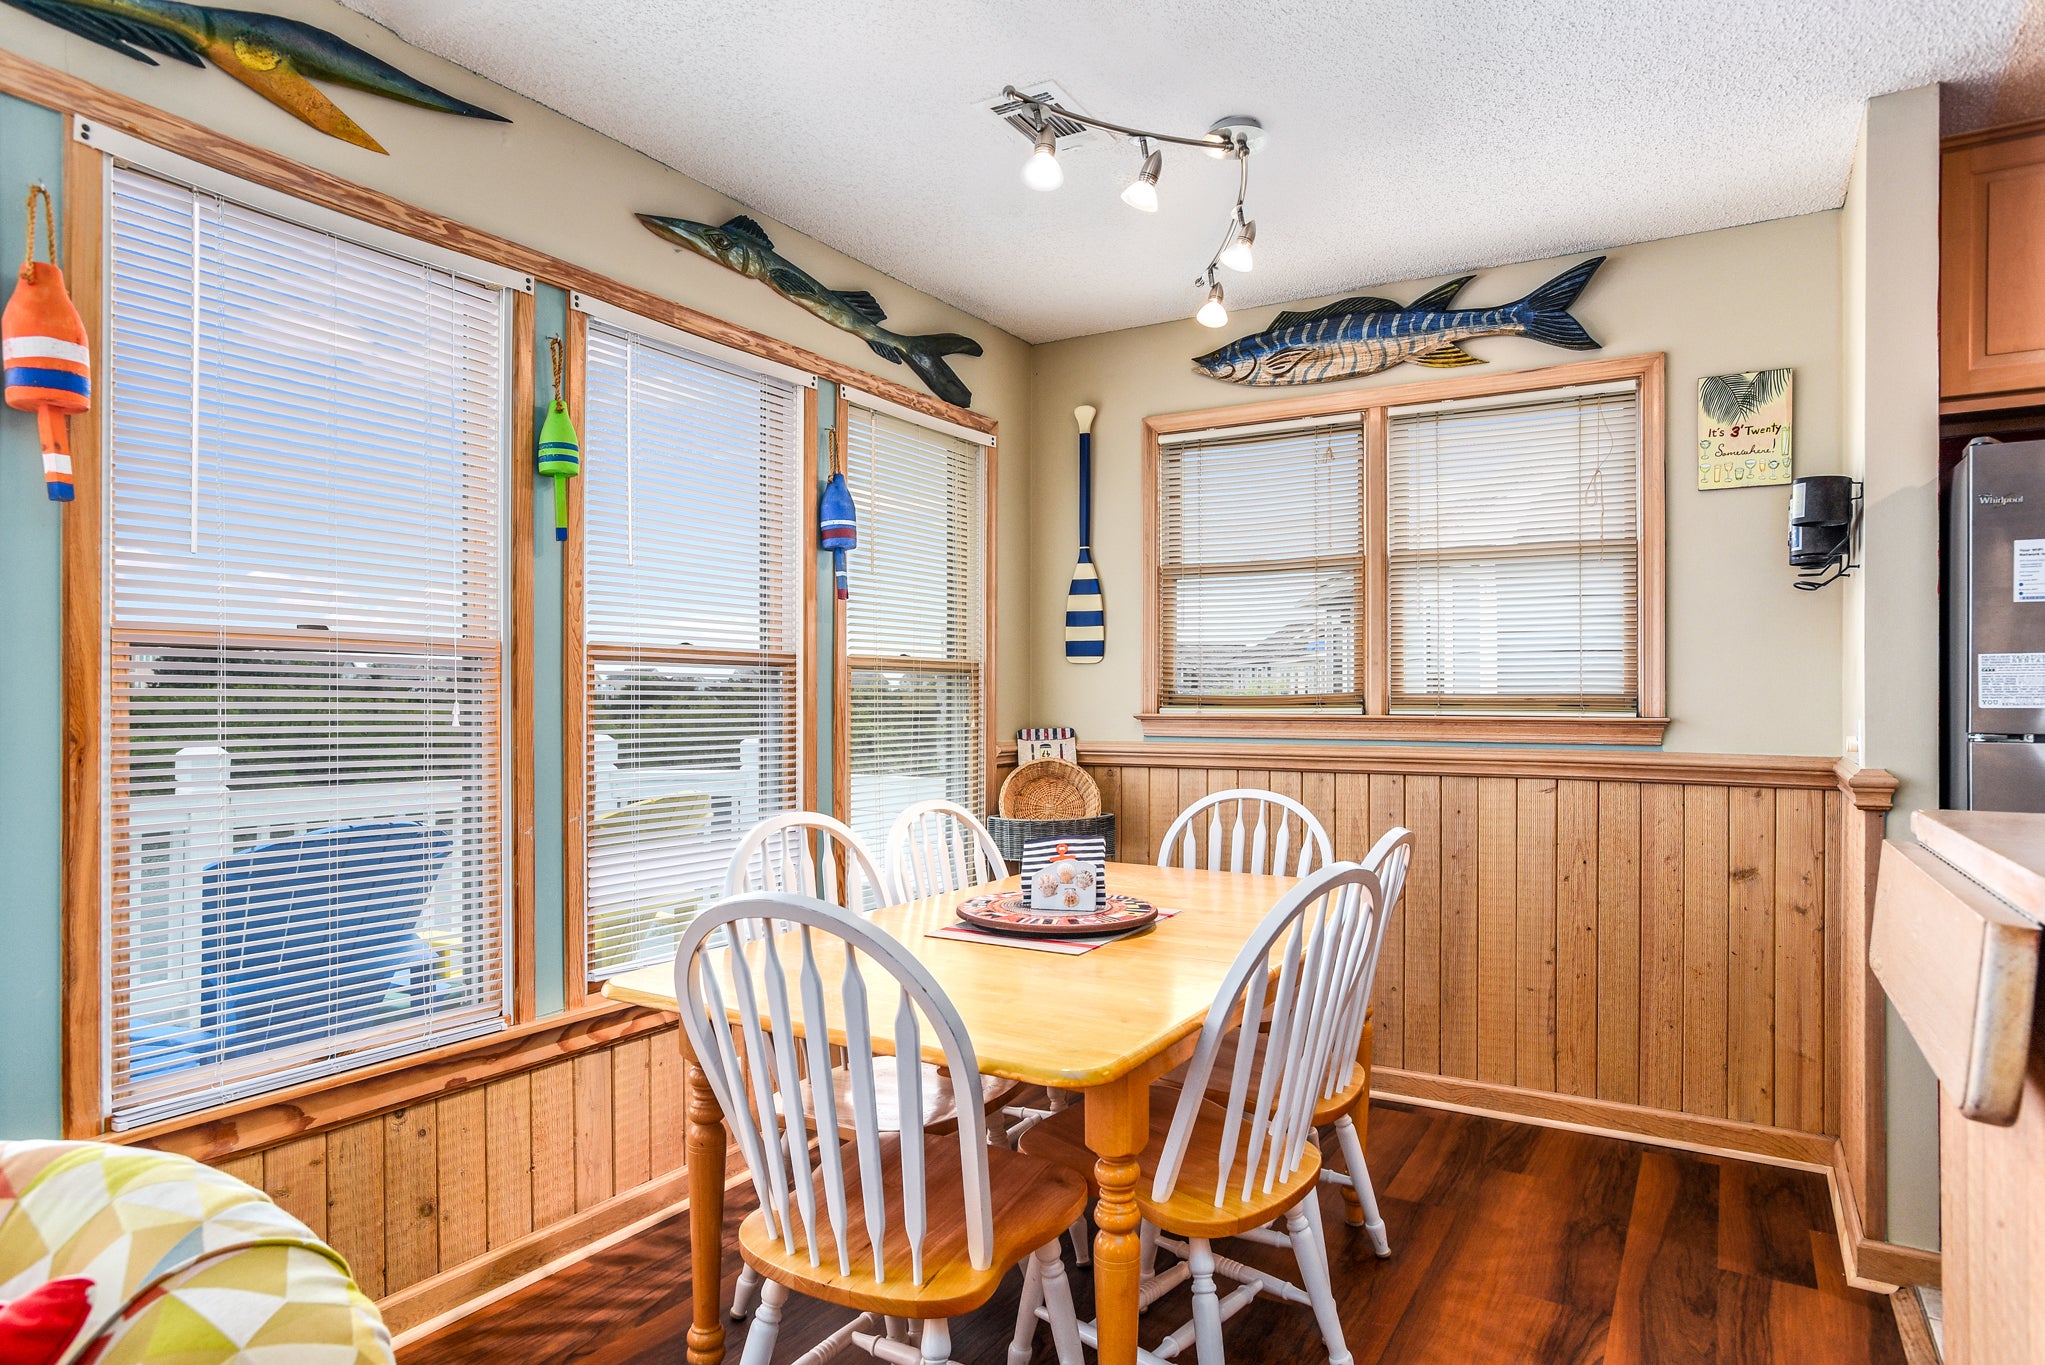 L39: Gone Fishin | Top Level Dining Area